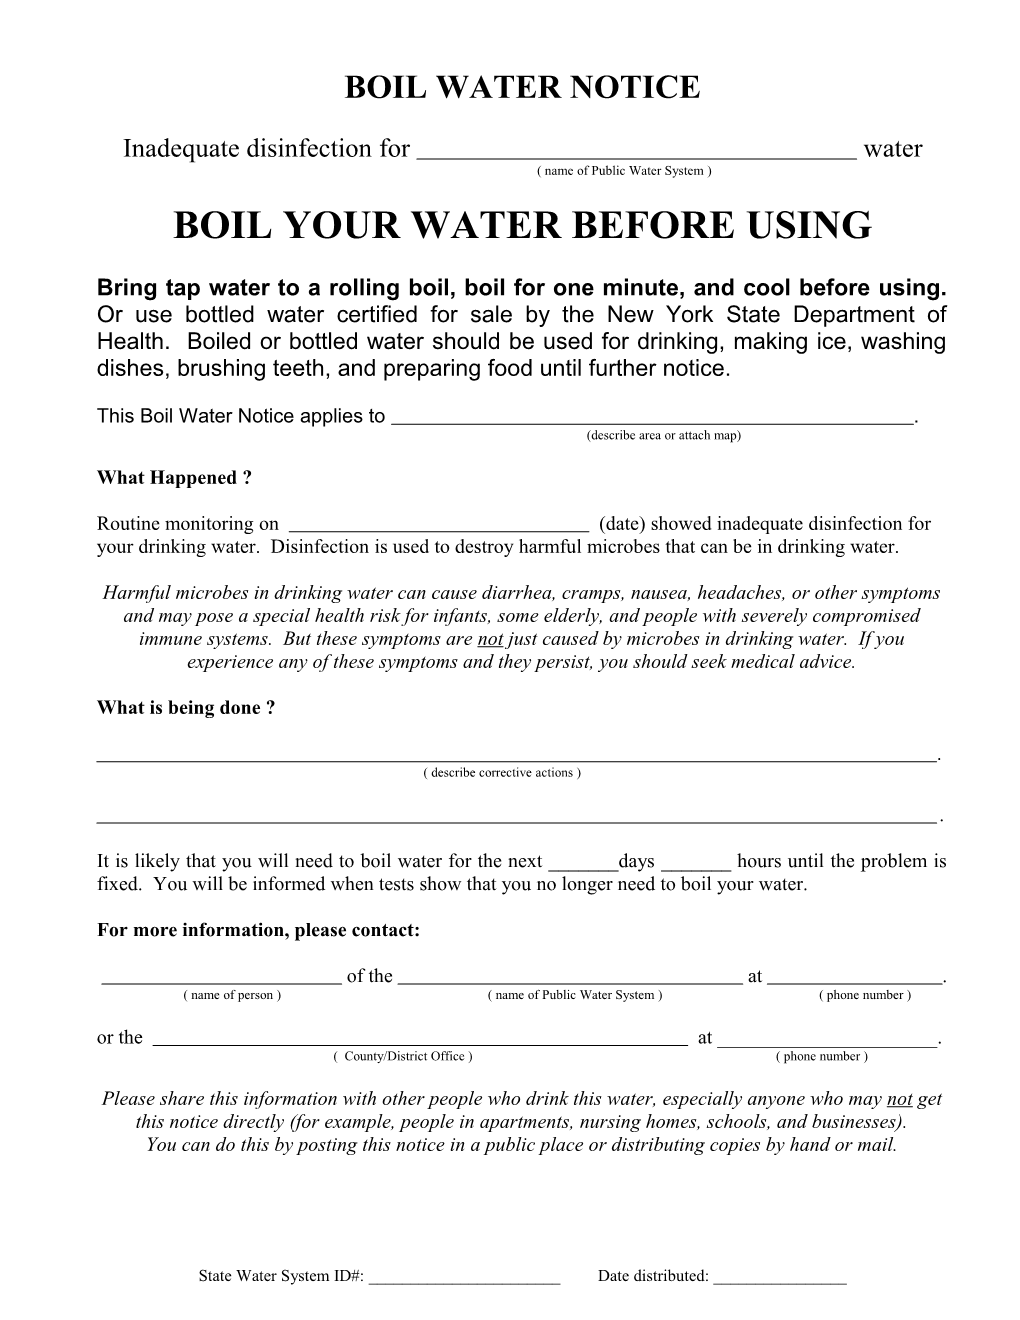 Boil Water Notice Templates